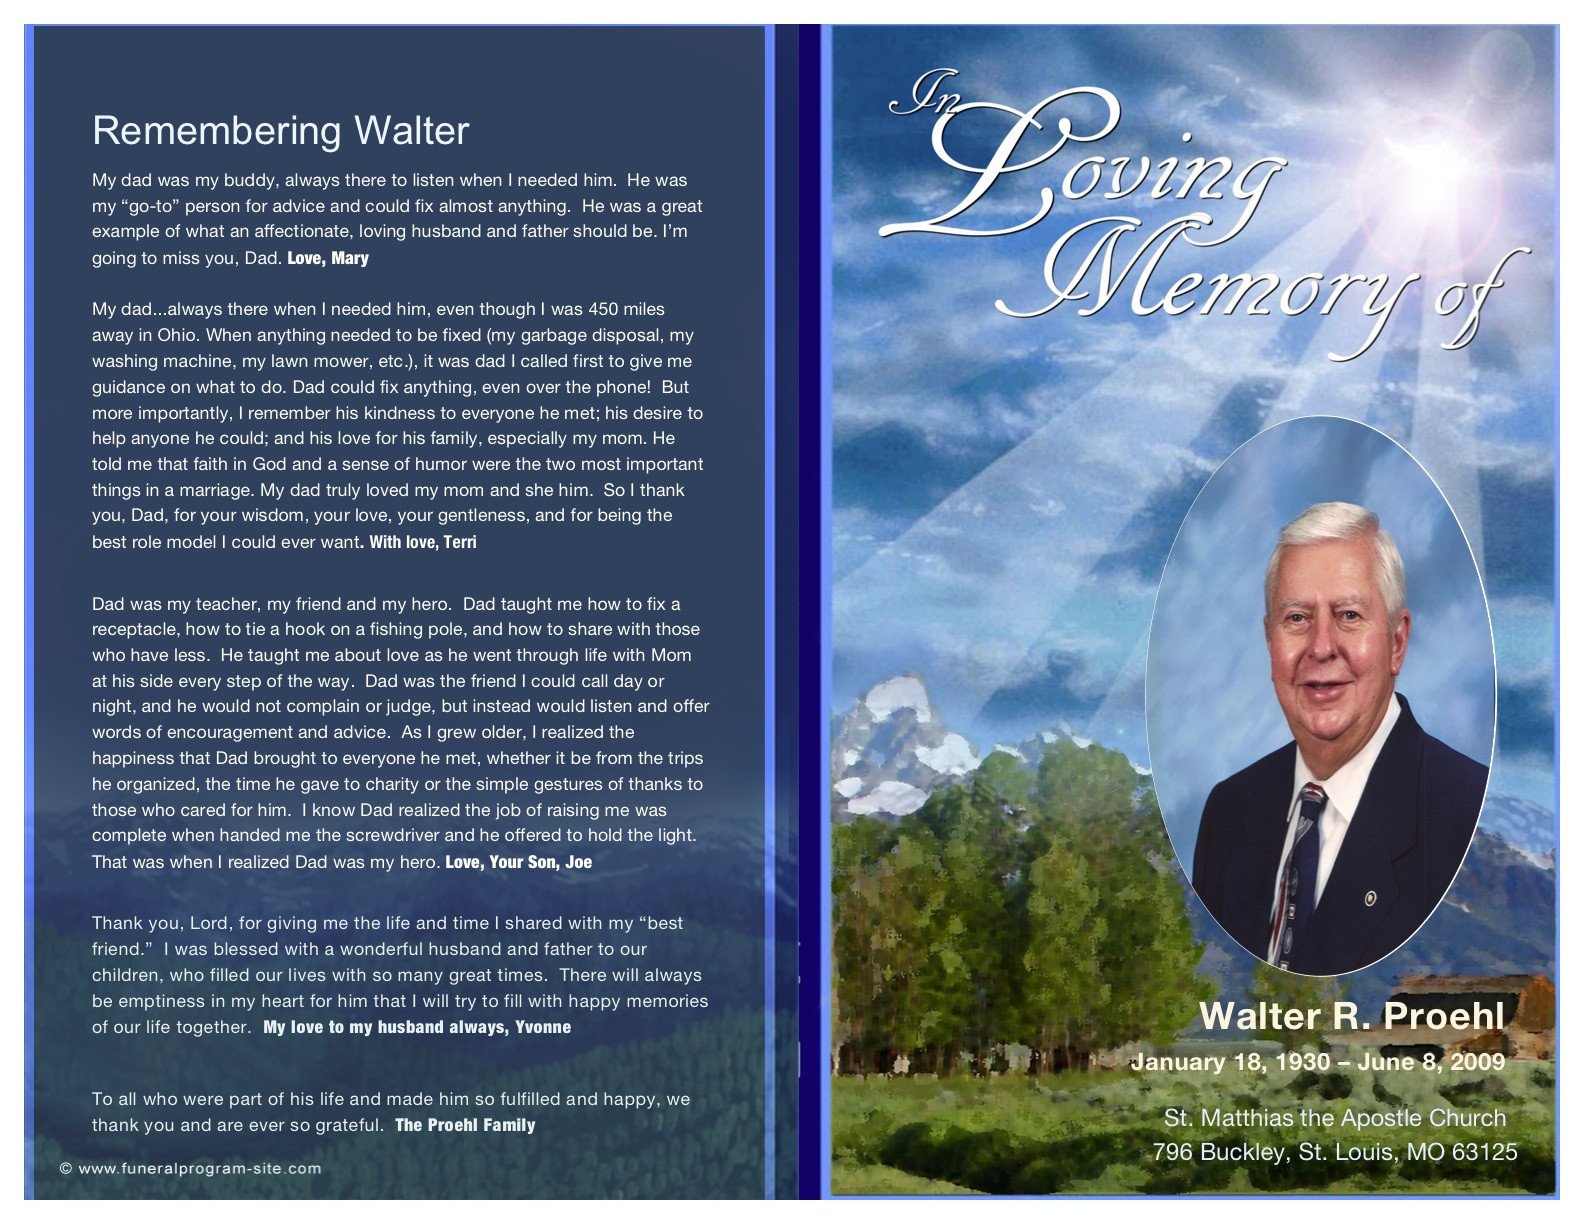 Wally’s Funeral Mass Booklet